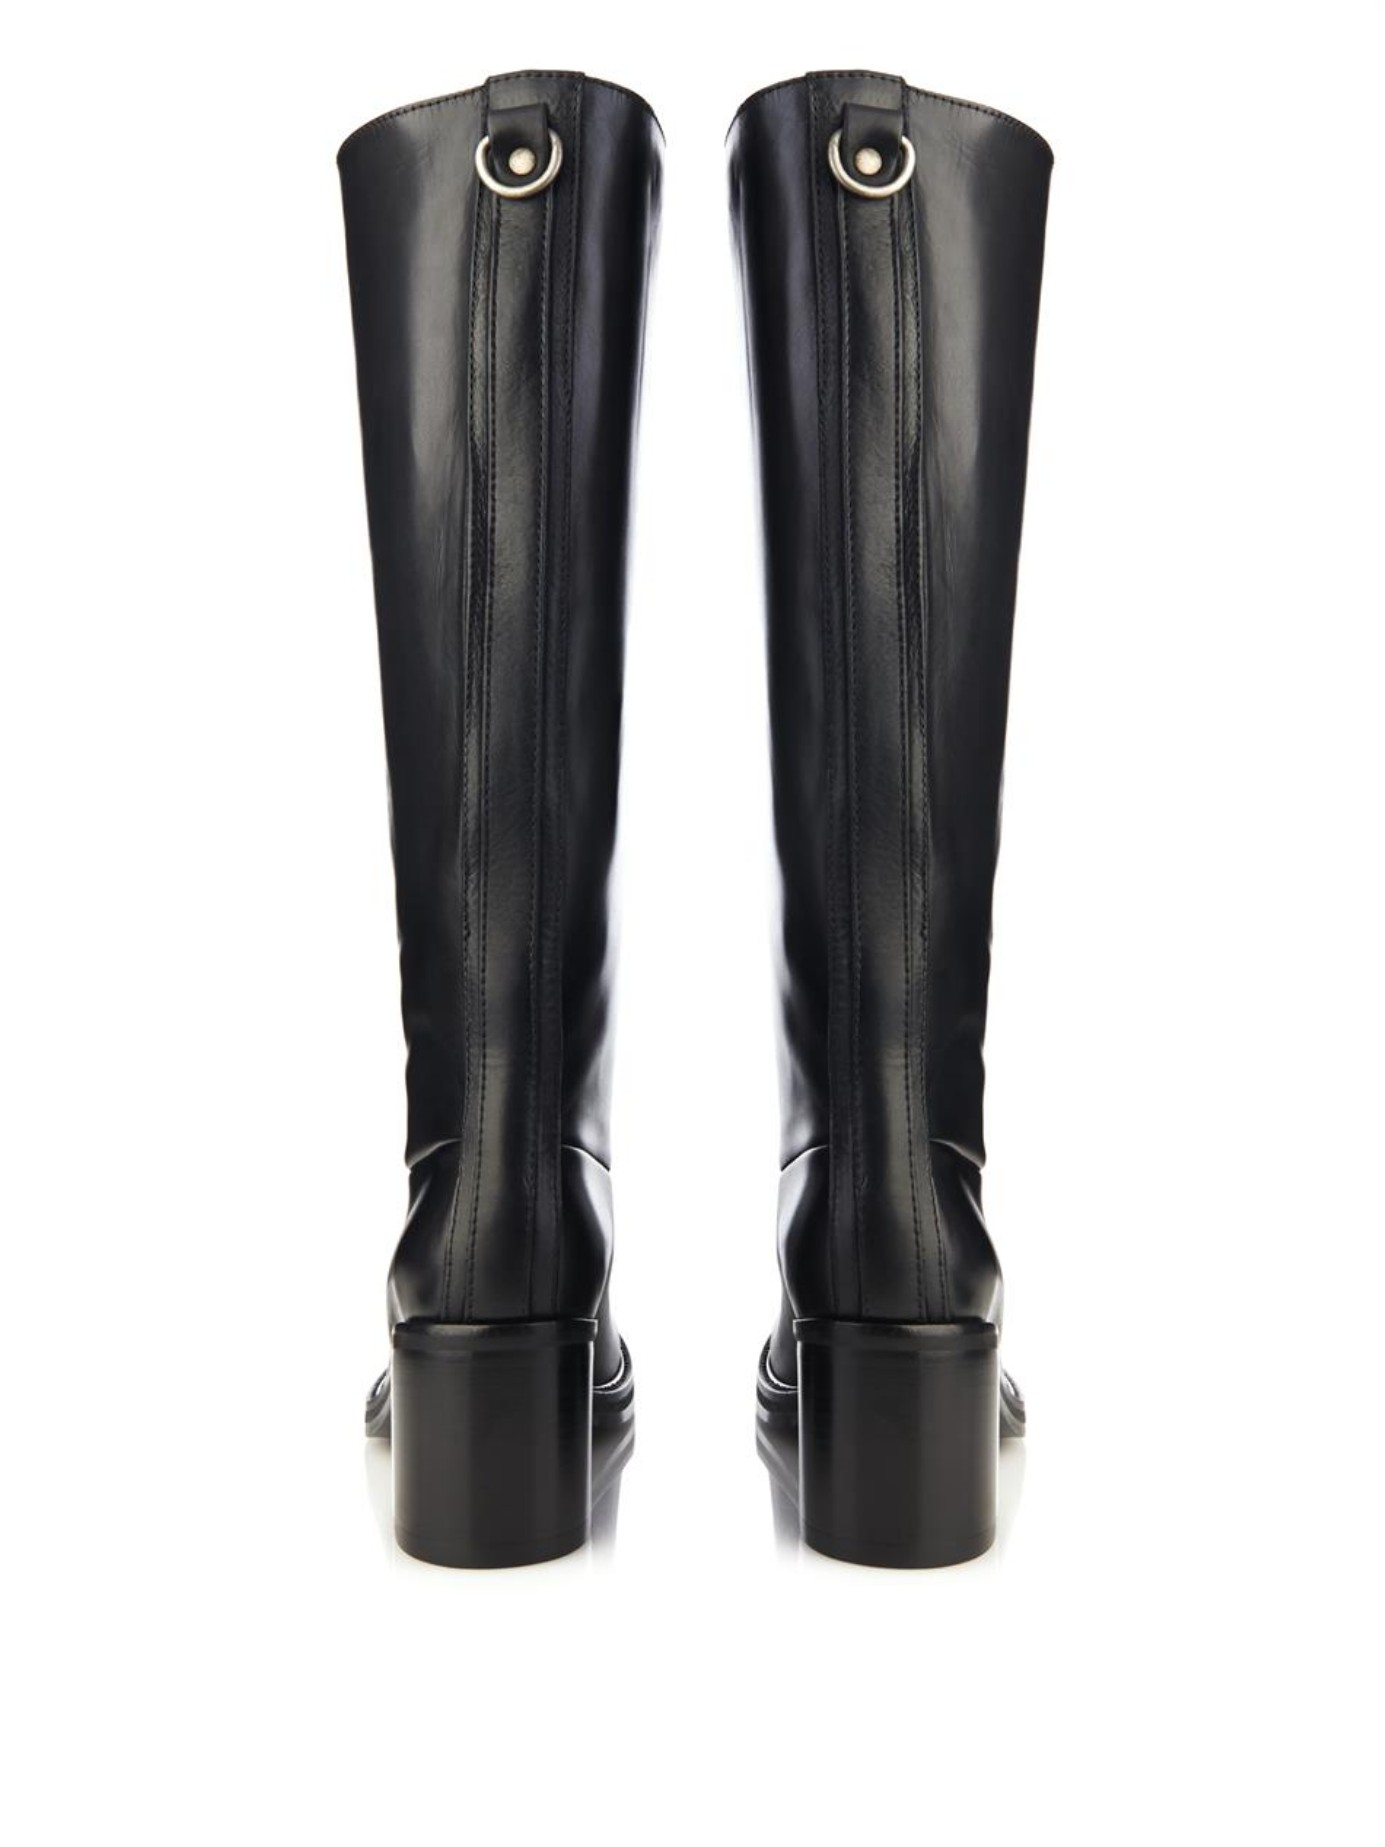 Acne Studios Egor Leather Knee Boots in Black - Lyst